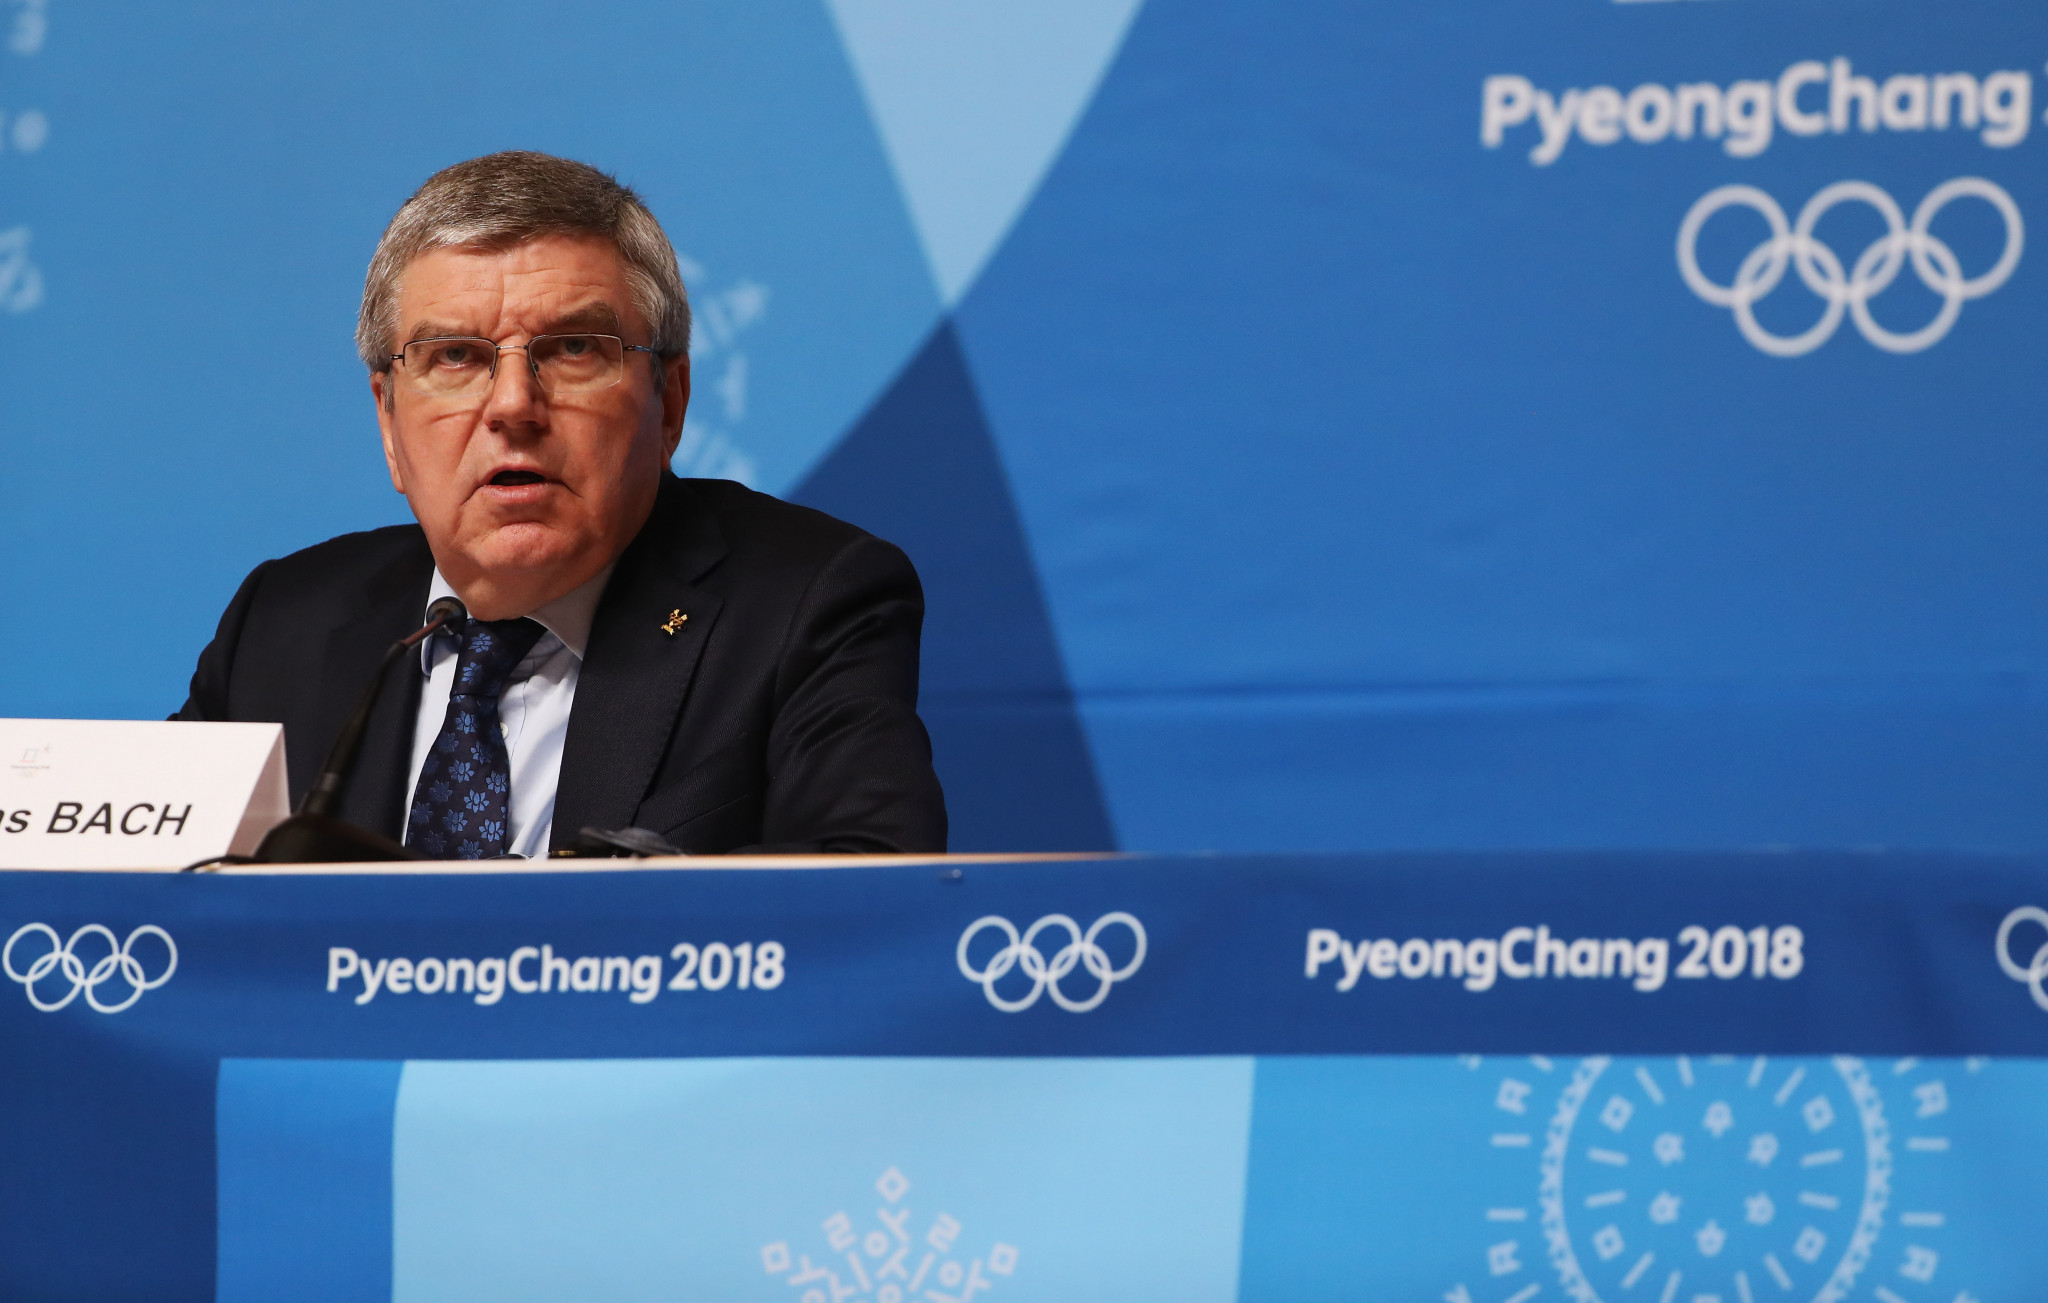 Thomas Bach criticised the running of CAS before the Pyeongchang 2018 Winter Olympics ©Getty Images